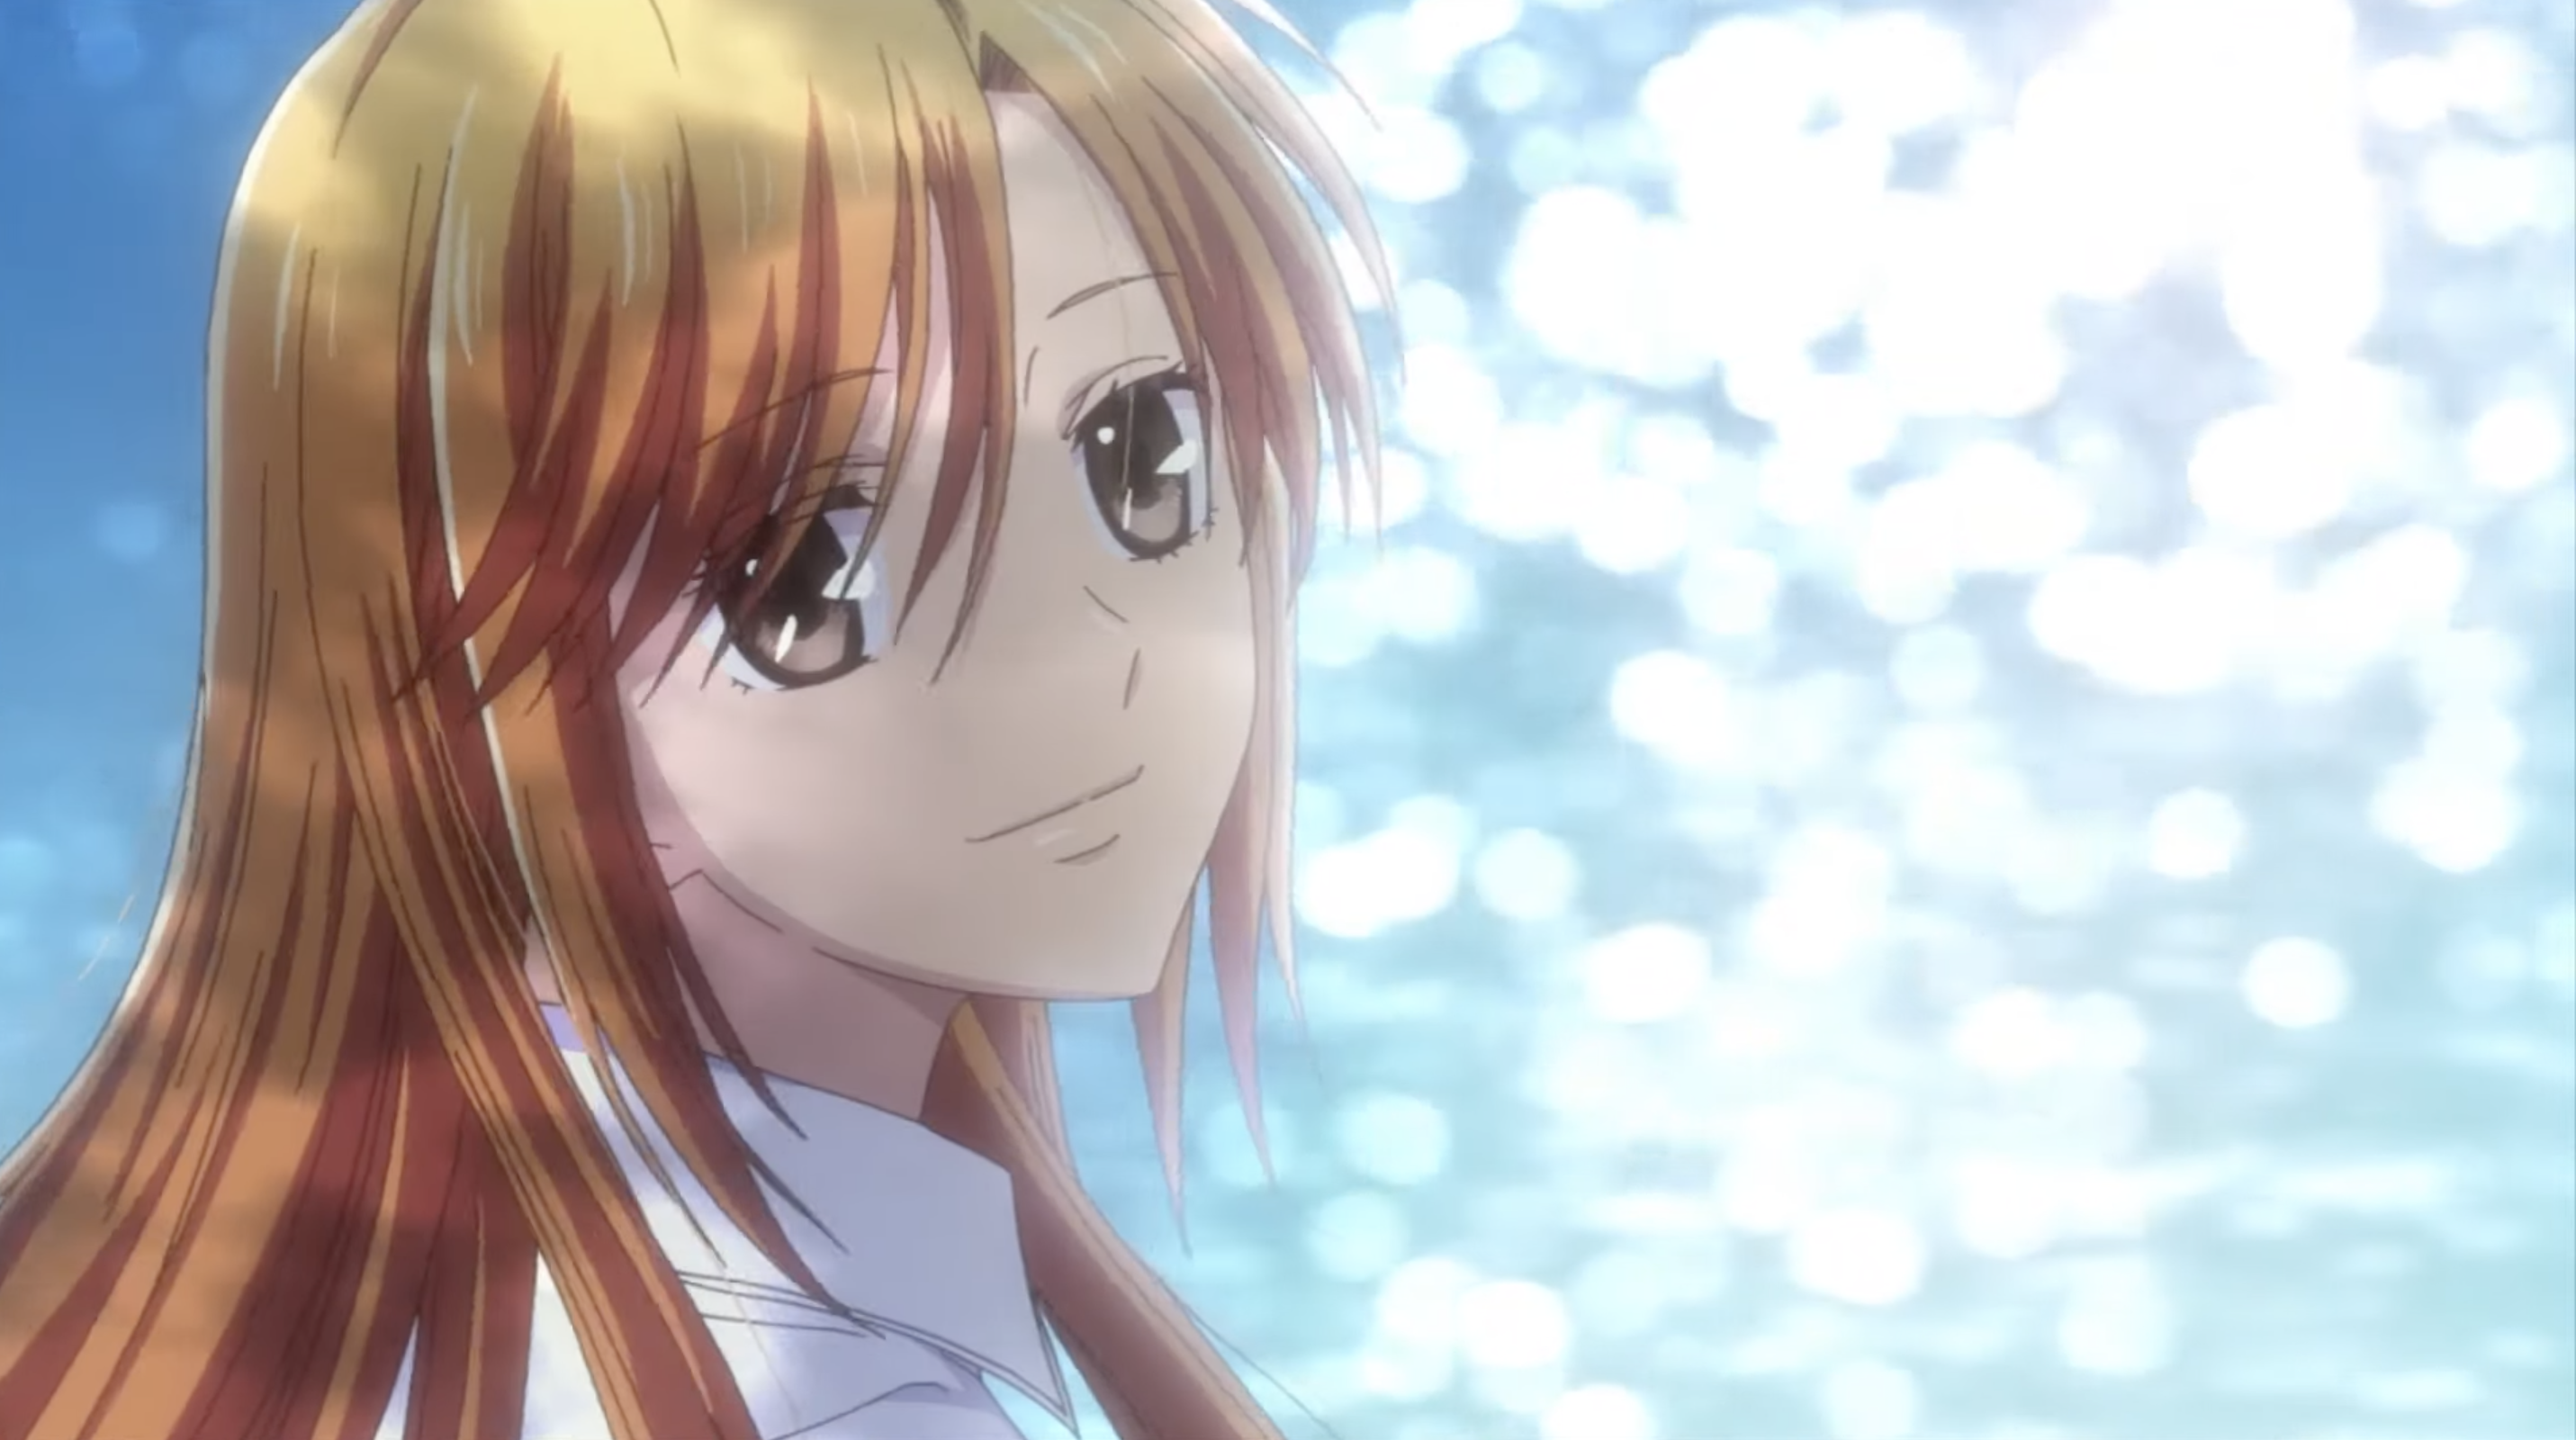 Kyoko Honda in Fruits Basket: Prelude. The light of the water is reflecting off her face and she has a soft smile as she looks into the camera.